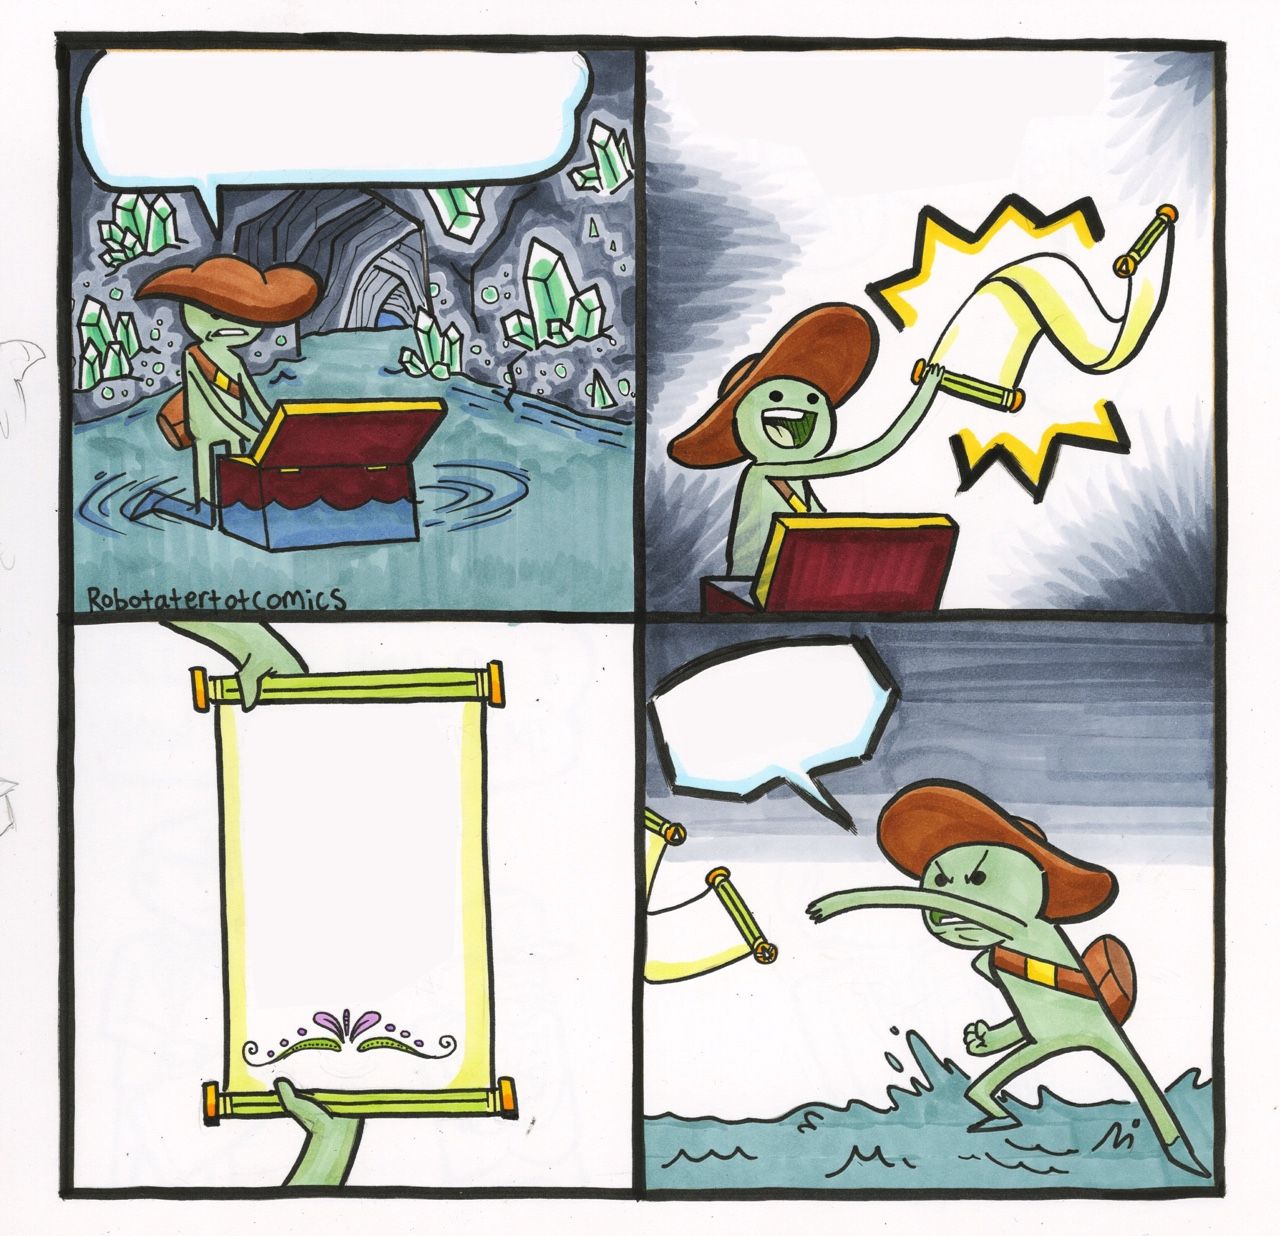 High Quality Scroll of Truth Blank Meme Template